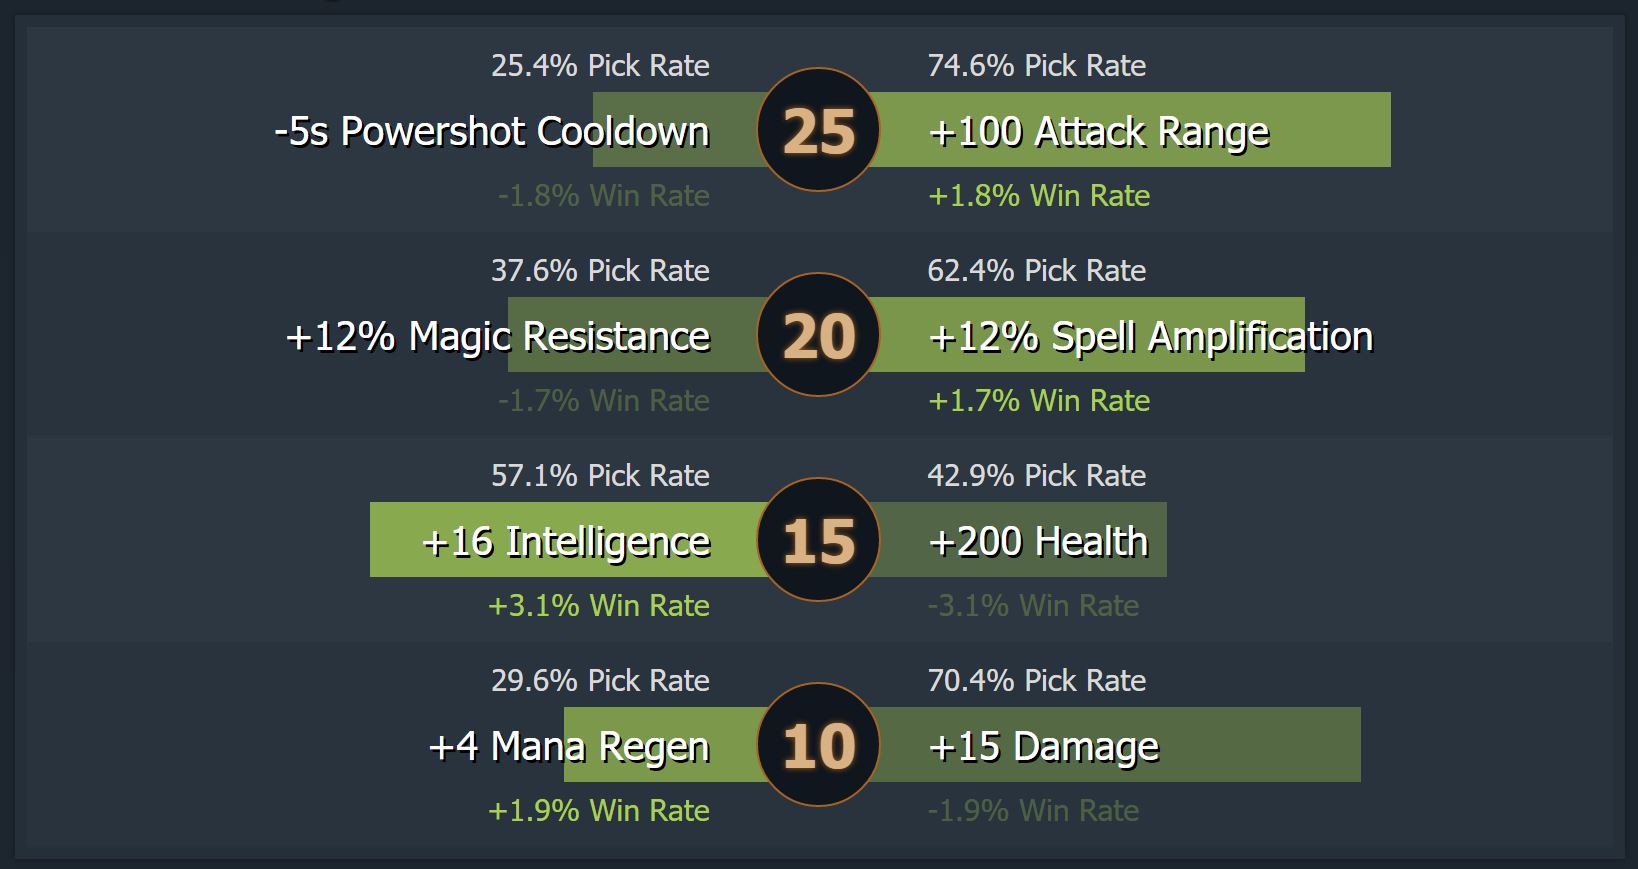 Pick rate